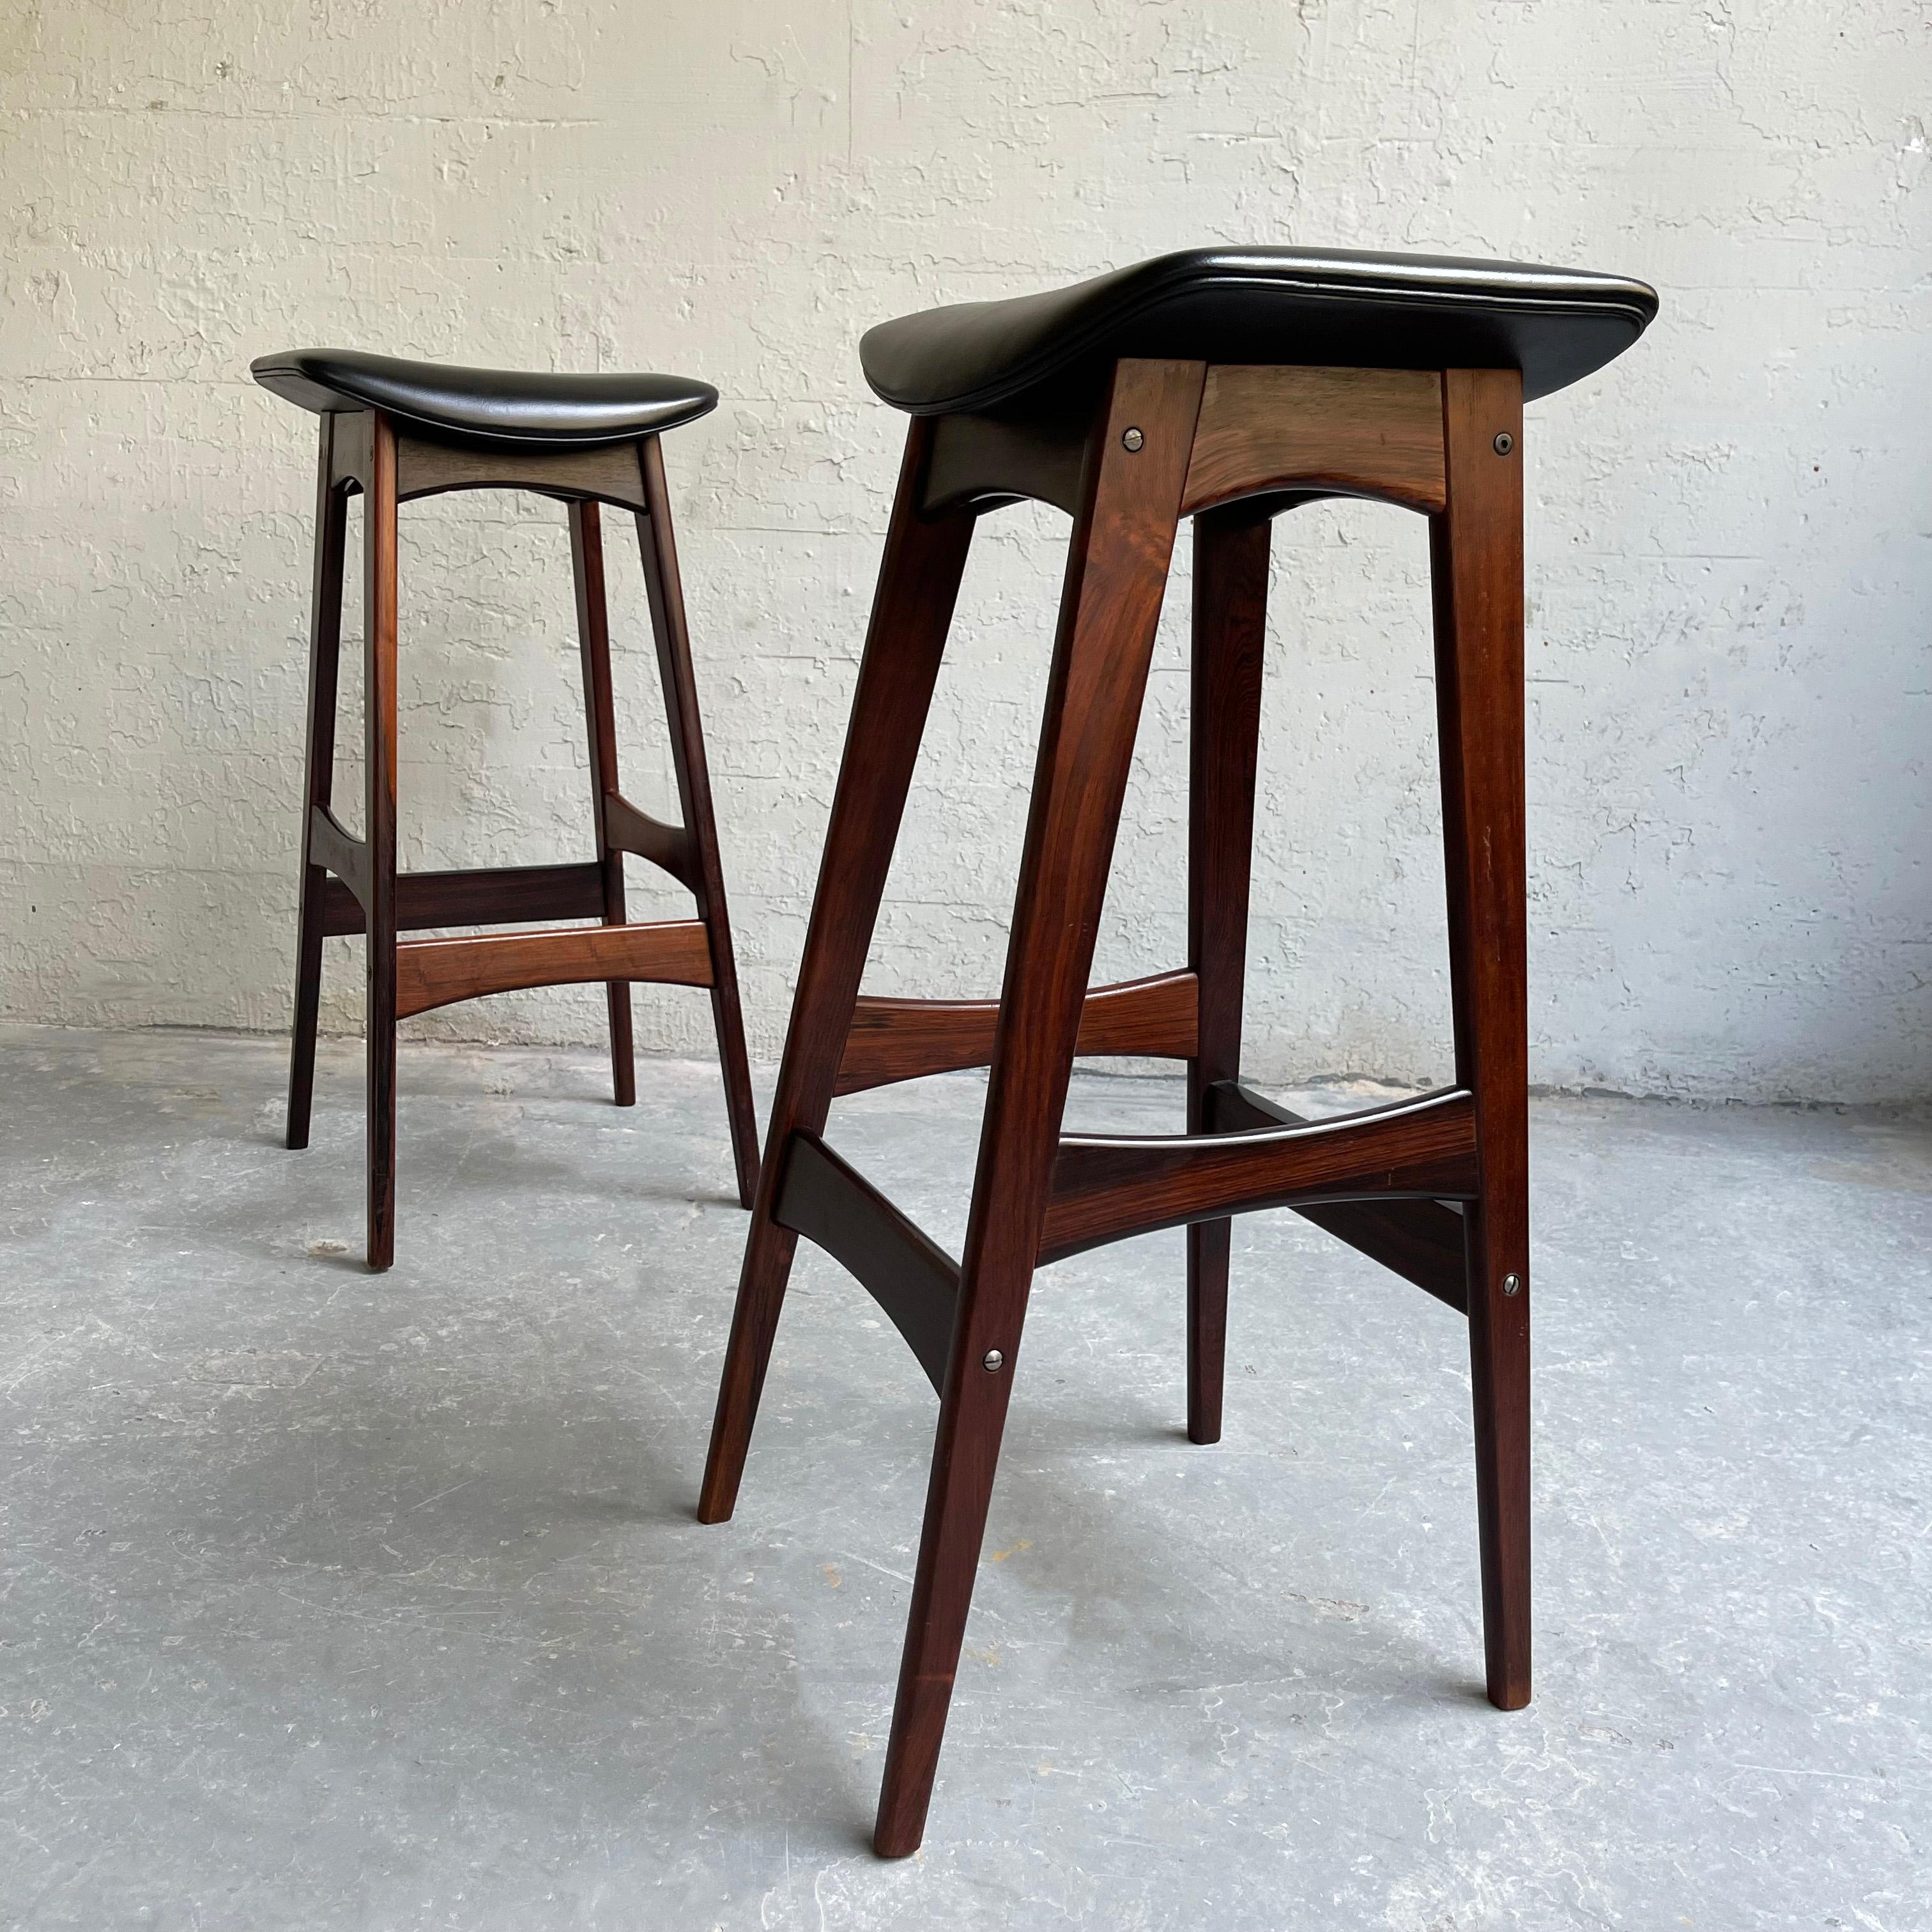 Danish Modern Rosewood and Vinyl Bar Stools by Johannes Andersen In Good Condition For Sale In Brooklyn, NY